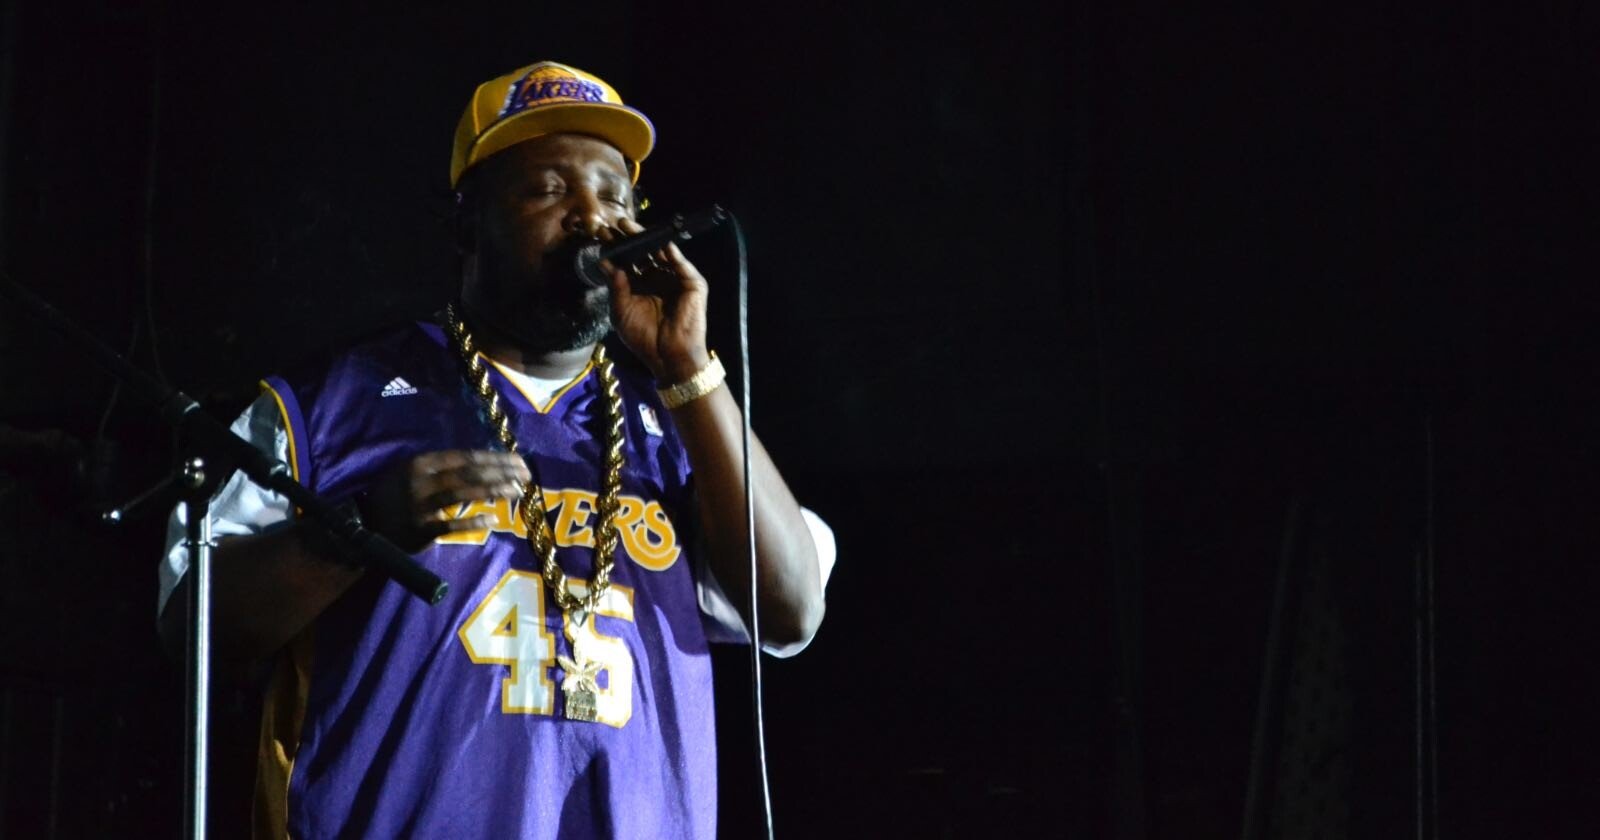 Police Sue Rapper Afroman for Using Images of Home Raid in Music Video